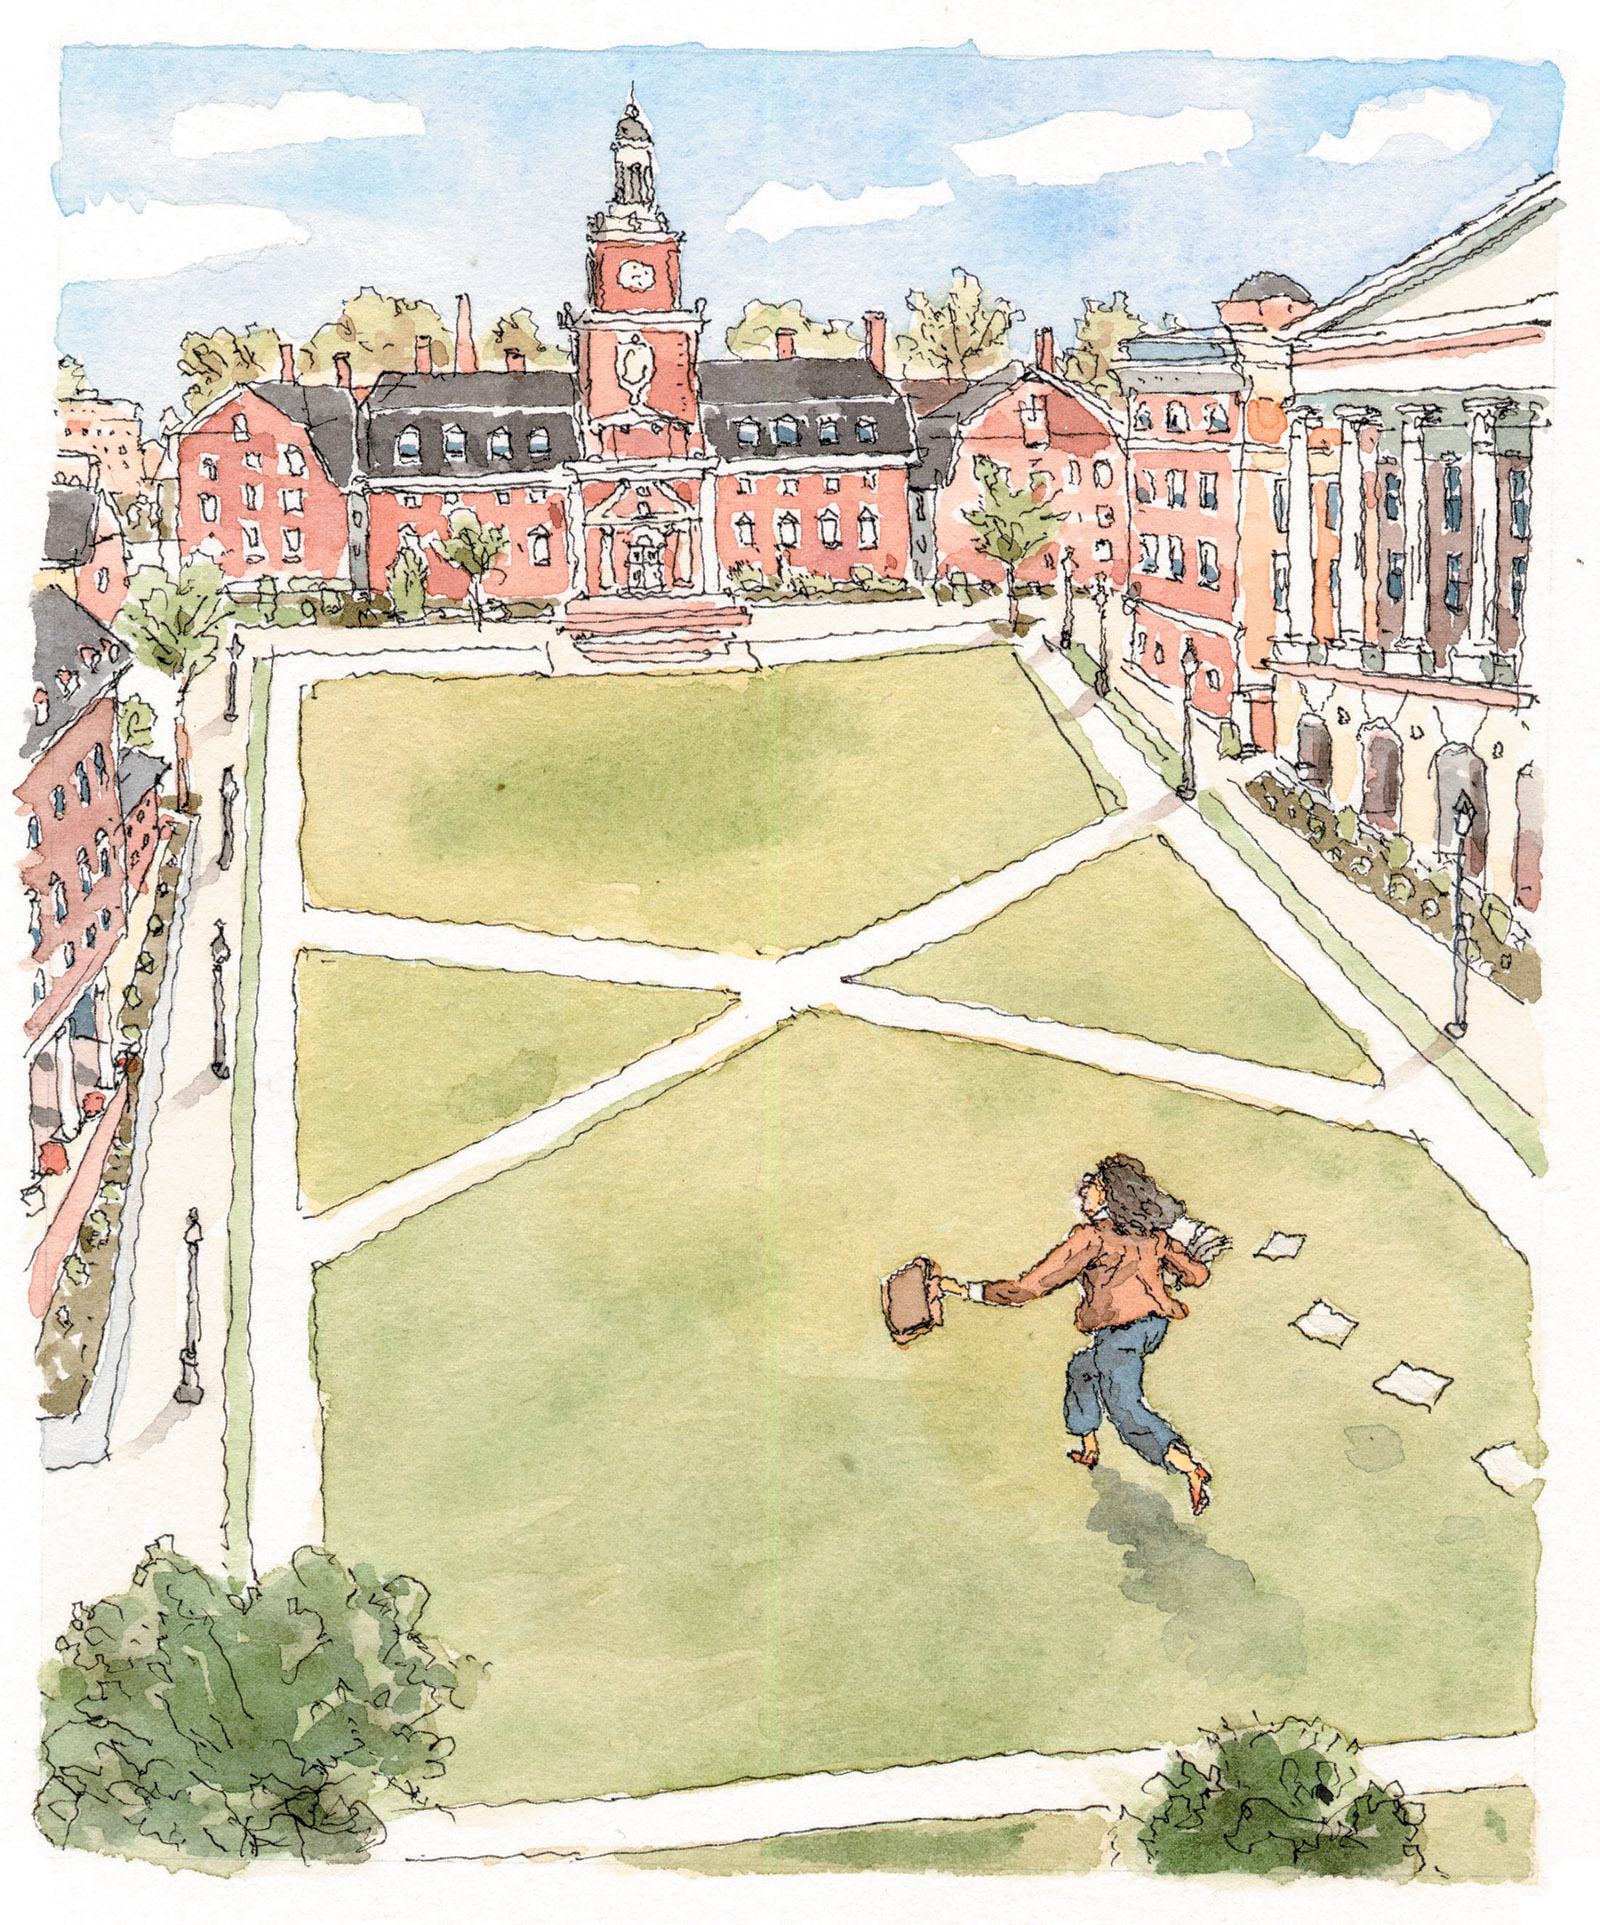 Drawing of a professor running on a college campus by John Cuneo